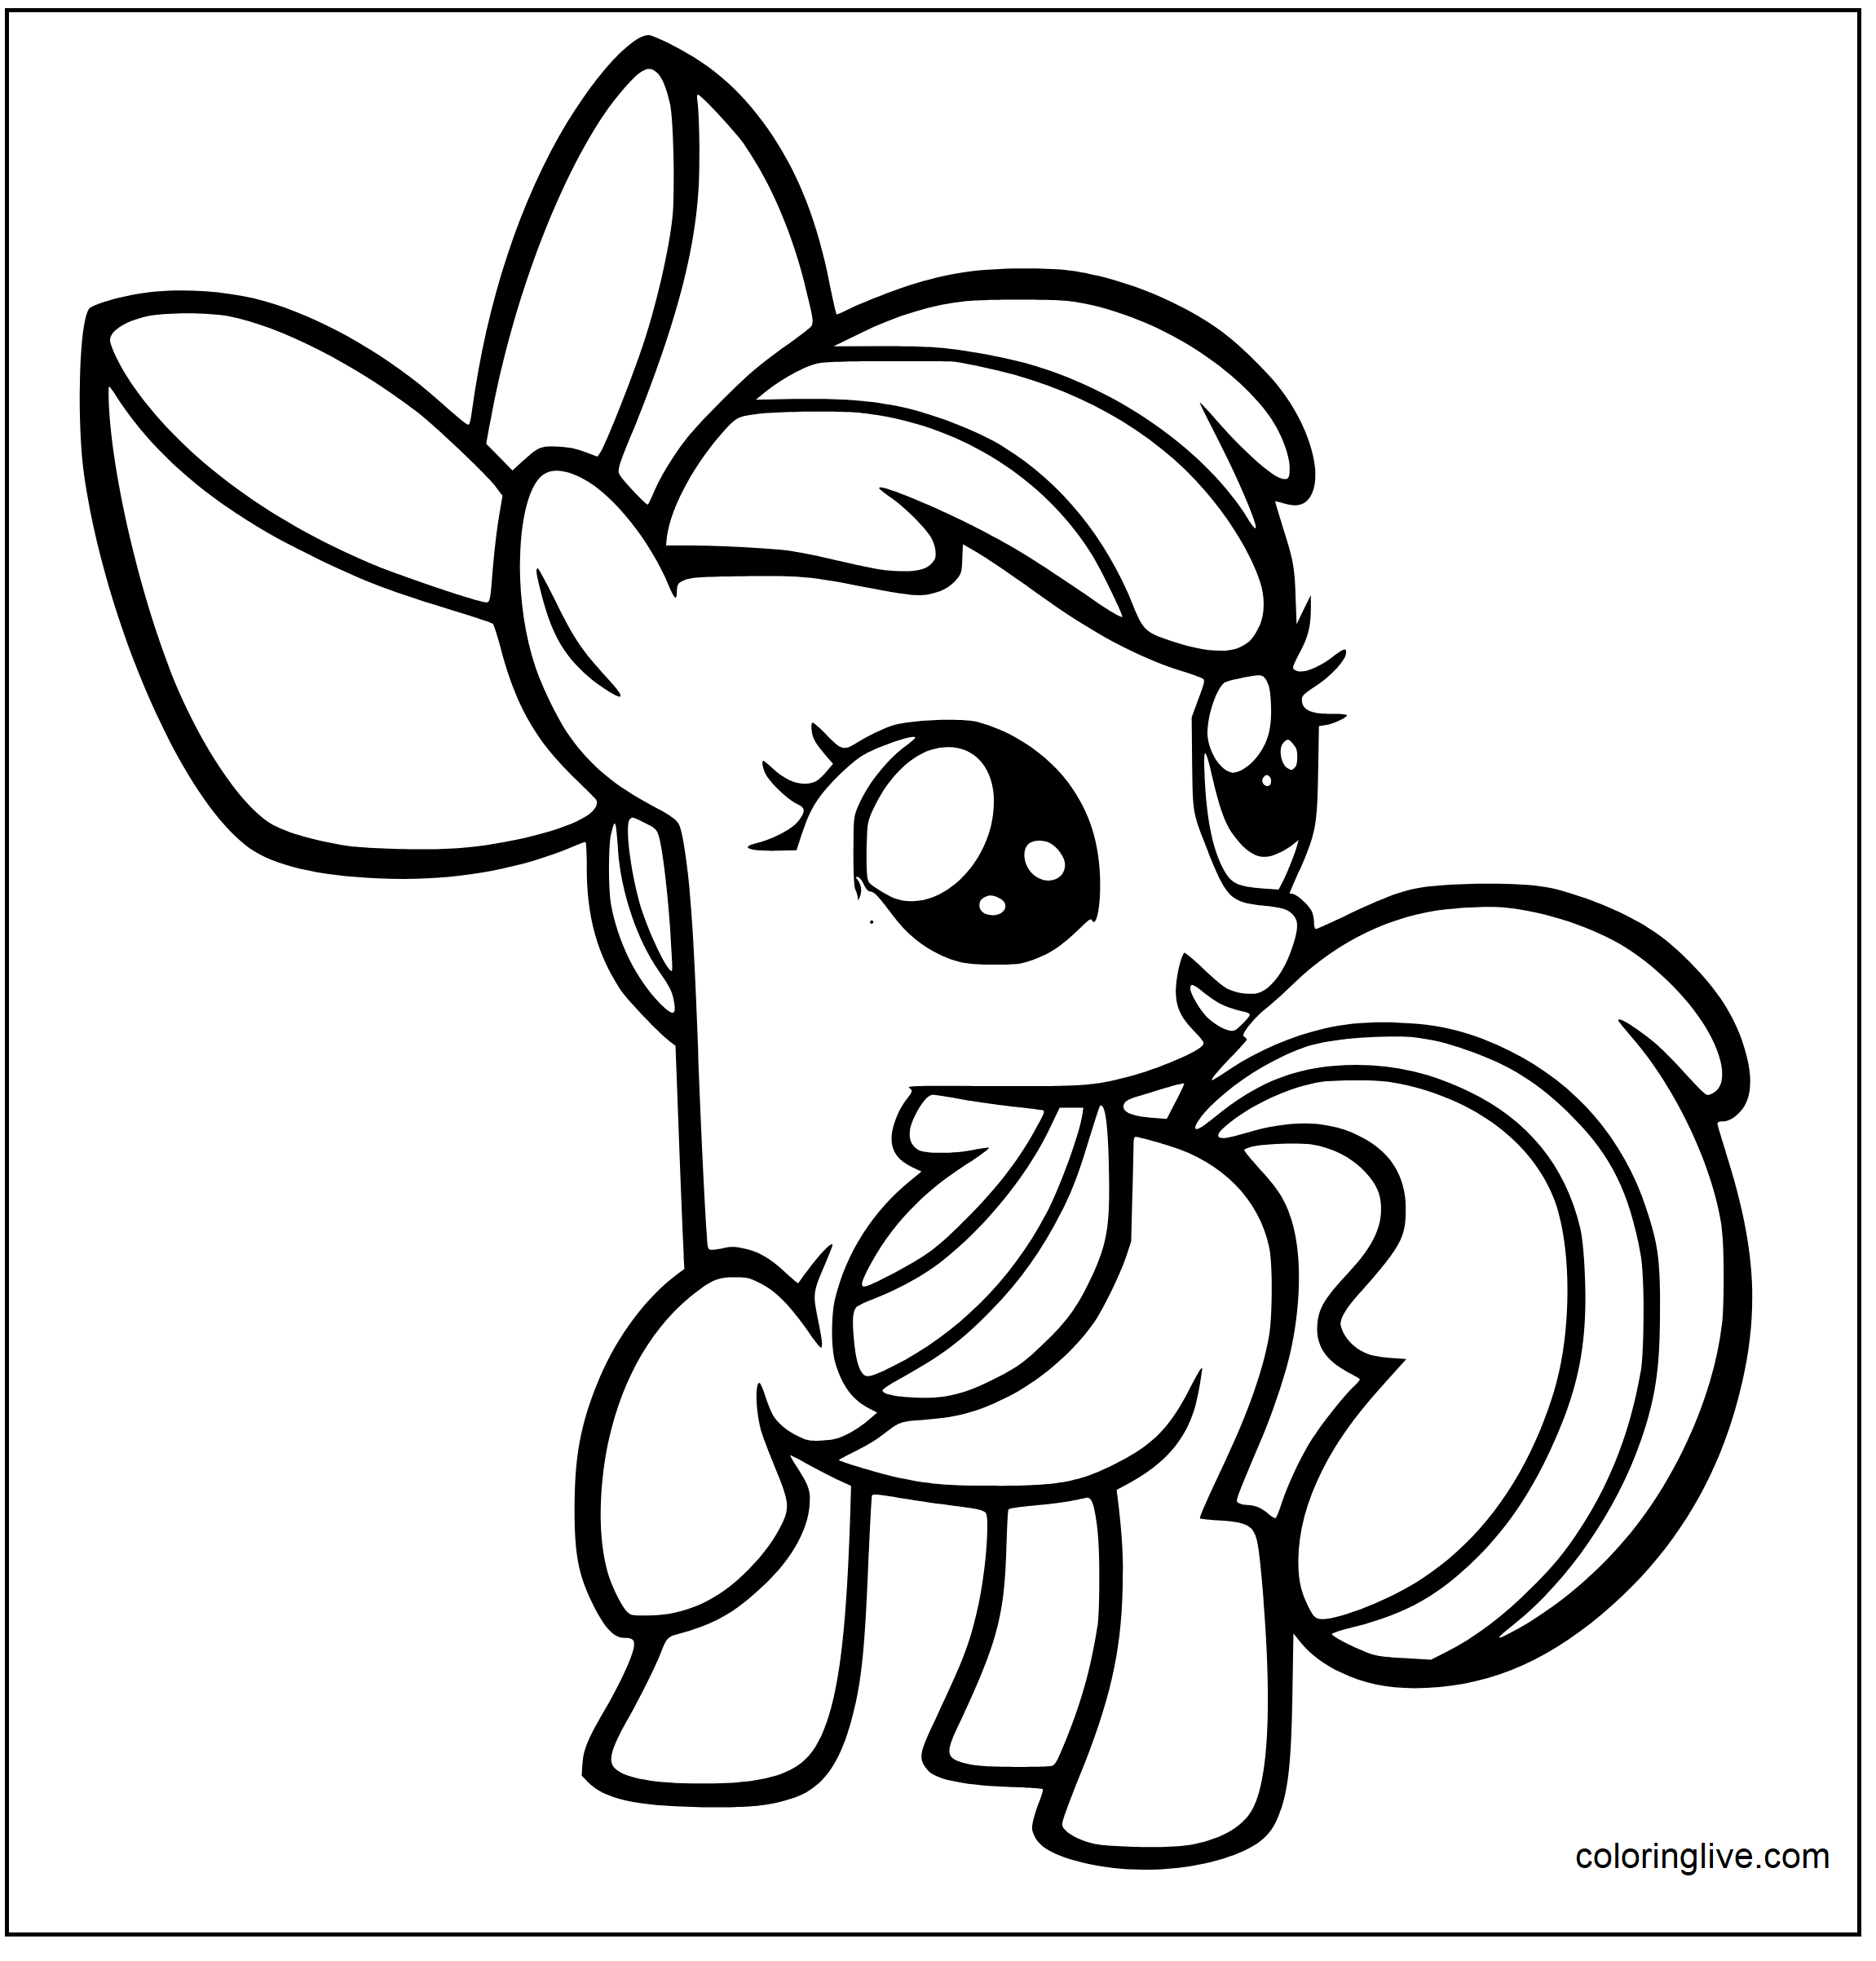 Printable Apple Bloom MLP Coloring Page for kids.